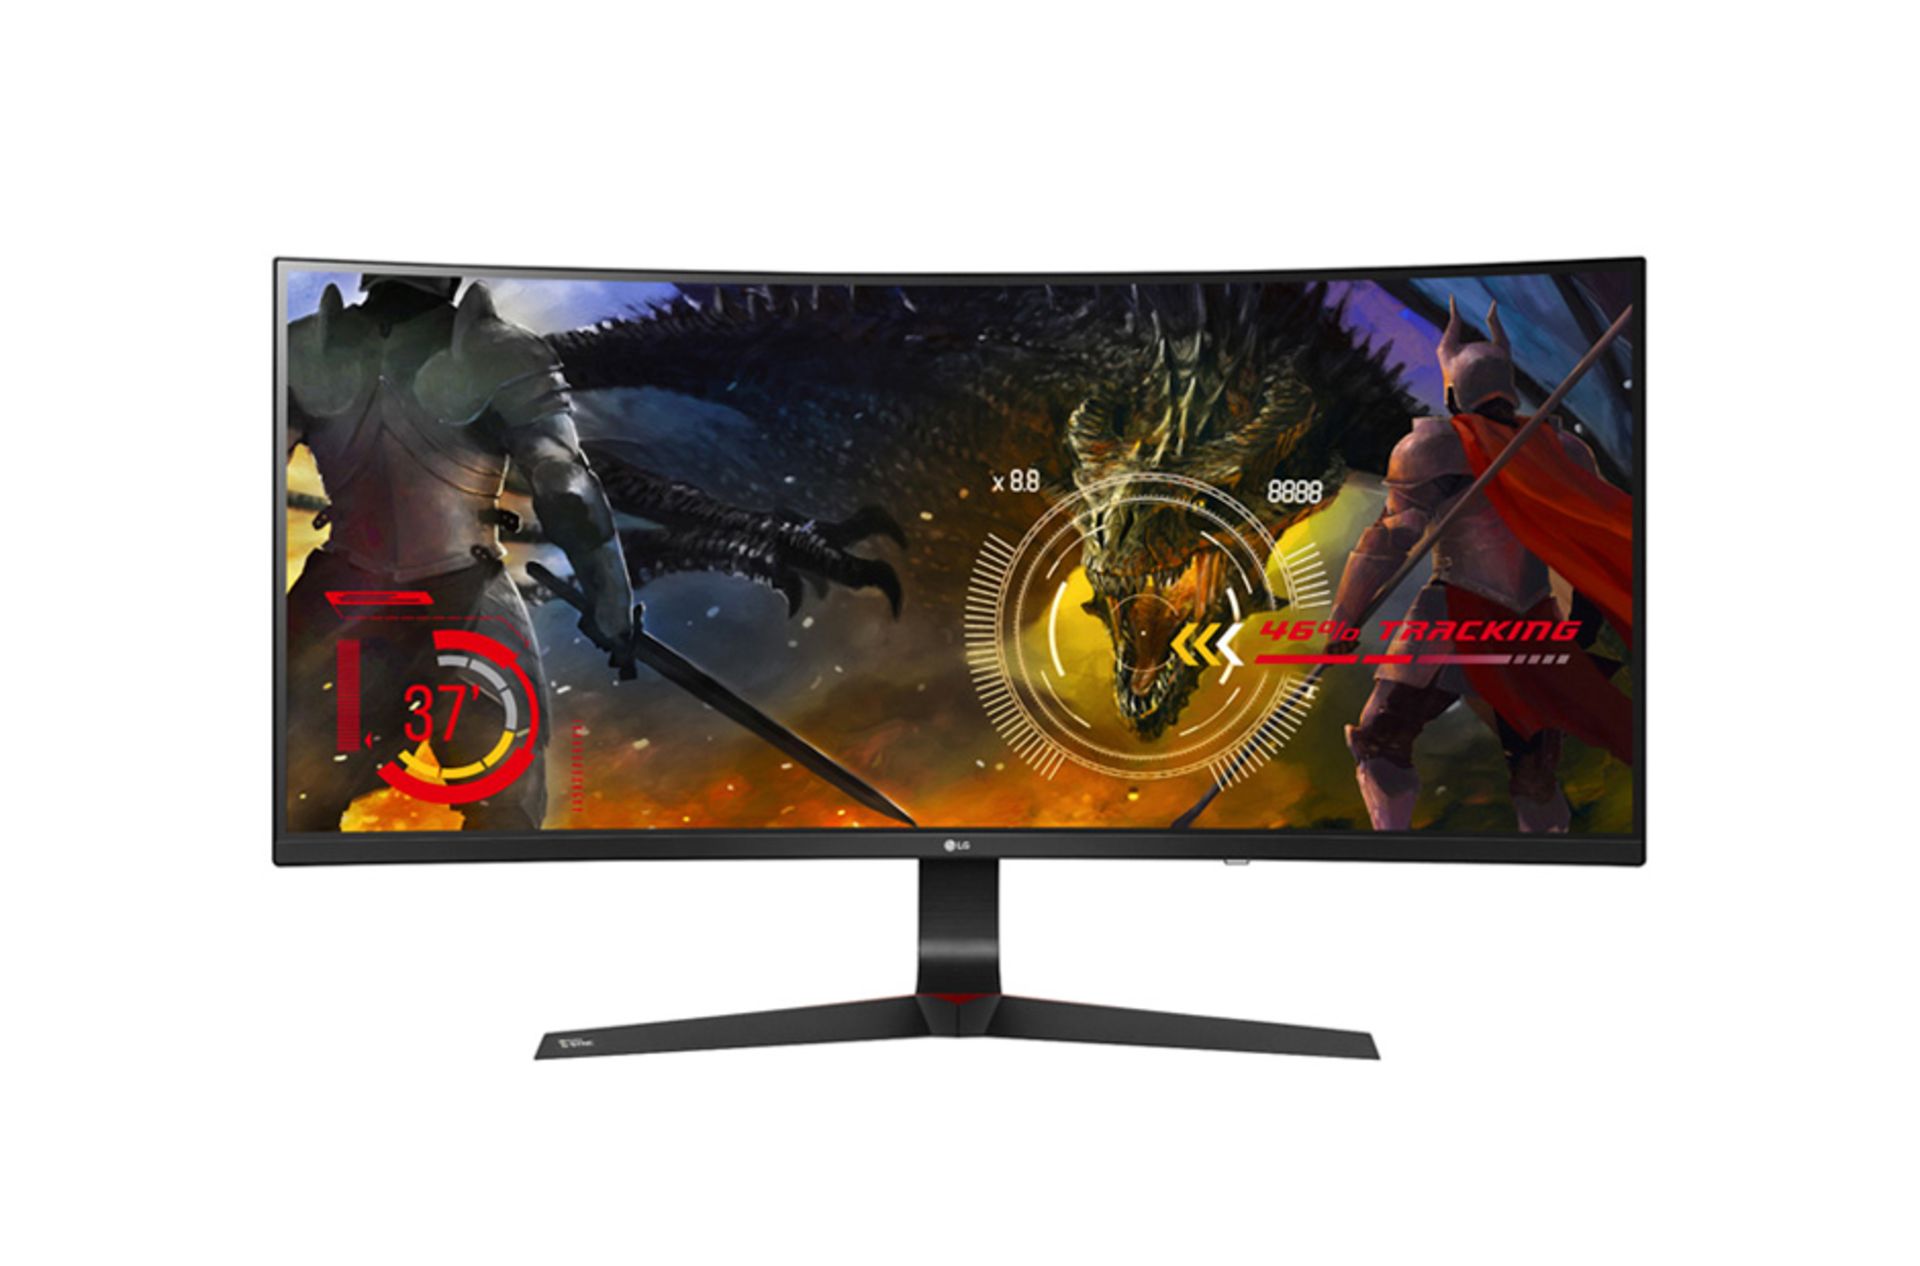 V Grade A LG 34 Inch CURVED ULTRA WIDE FULL HD IPS LED MONITOR - 2560 X 1080P - HDMI, DISPLAY PORT